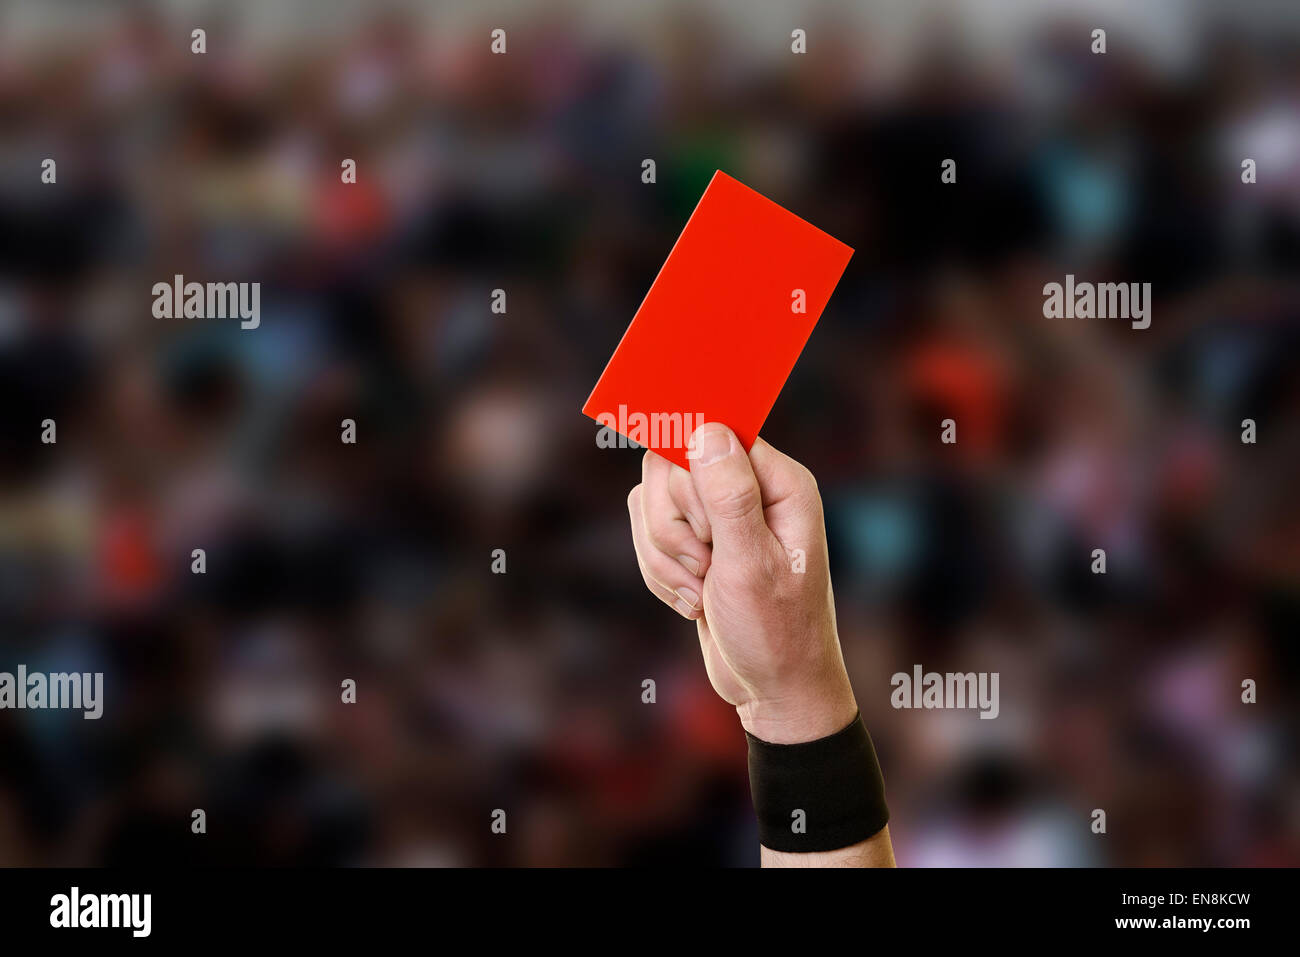 Referee Showing a Red Card During a Football Game, Close Up. Stock Photo